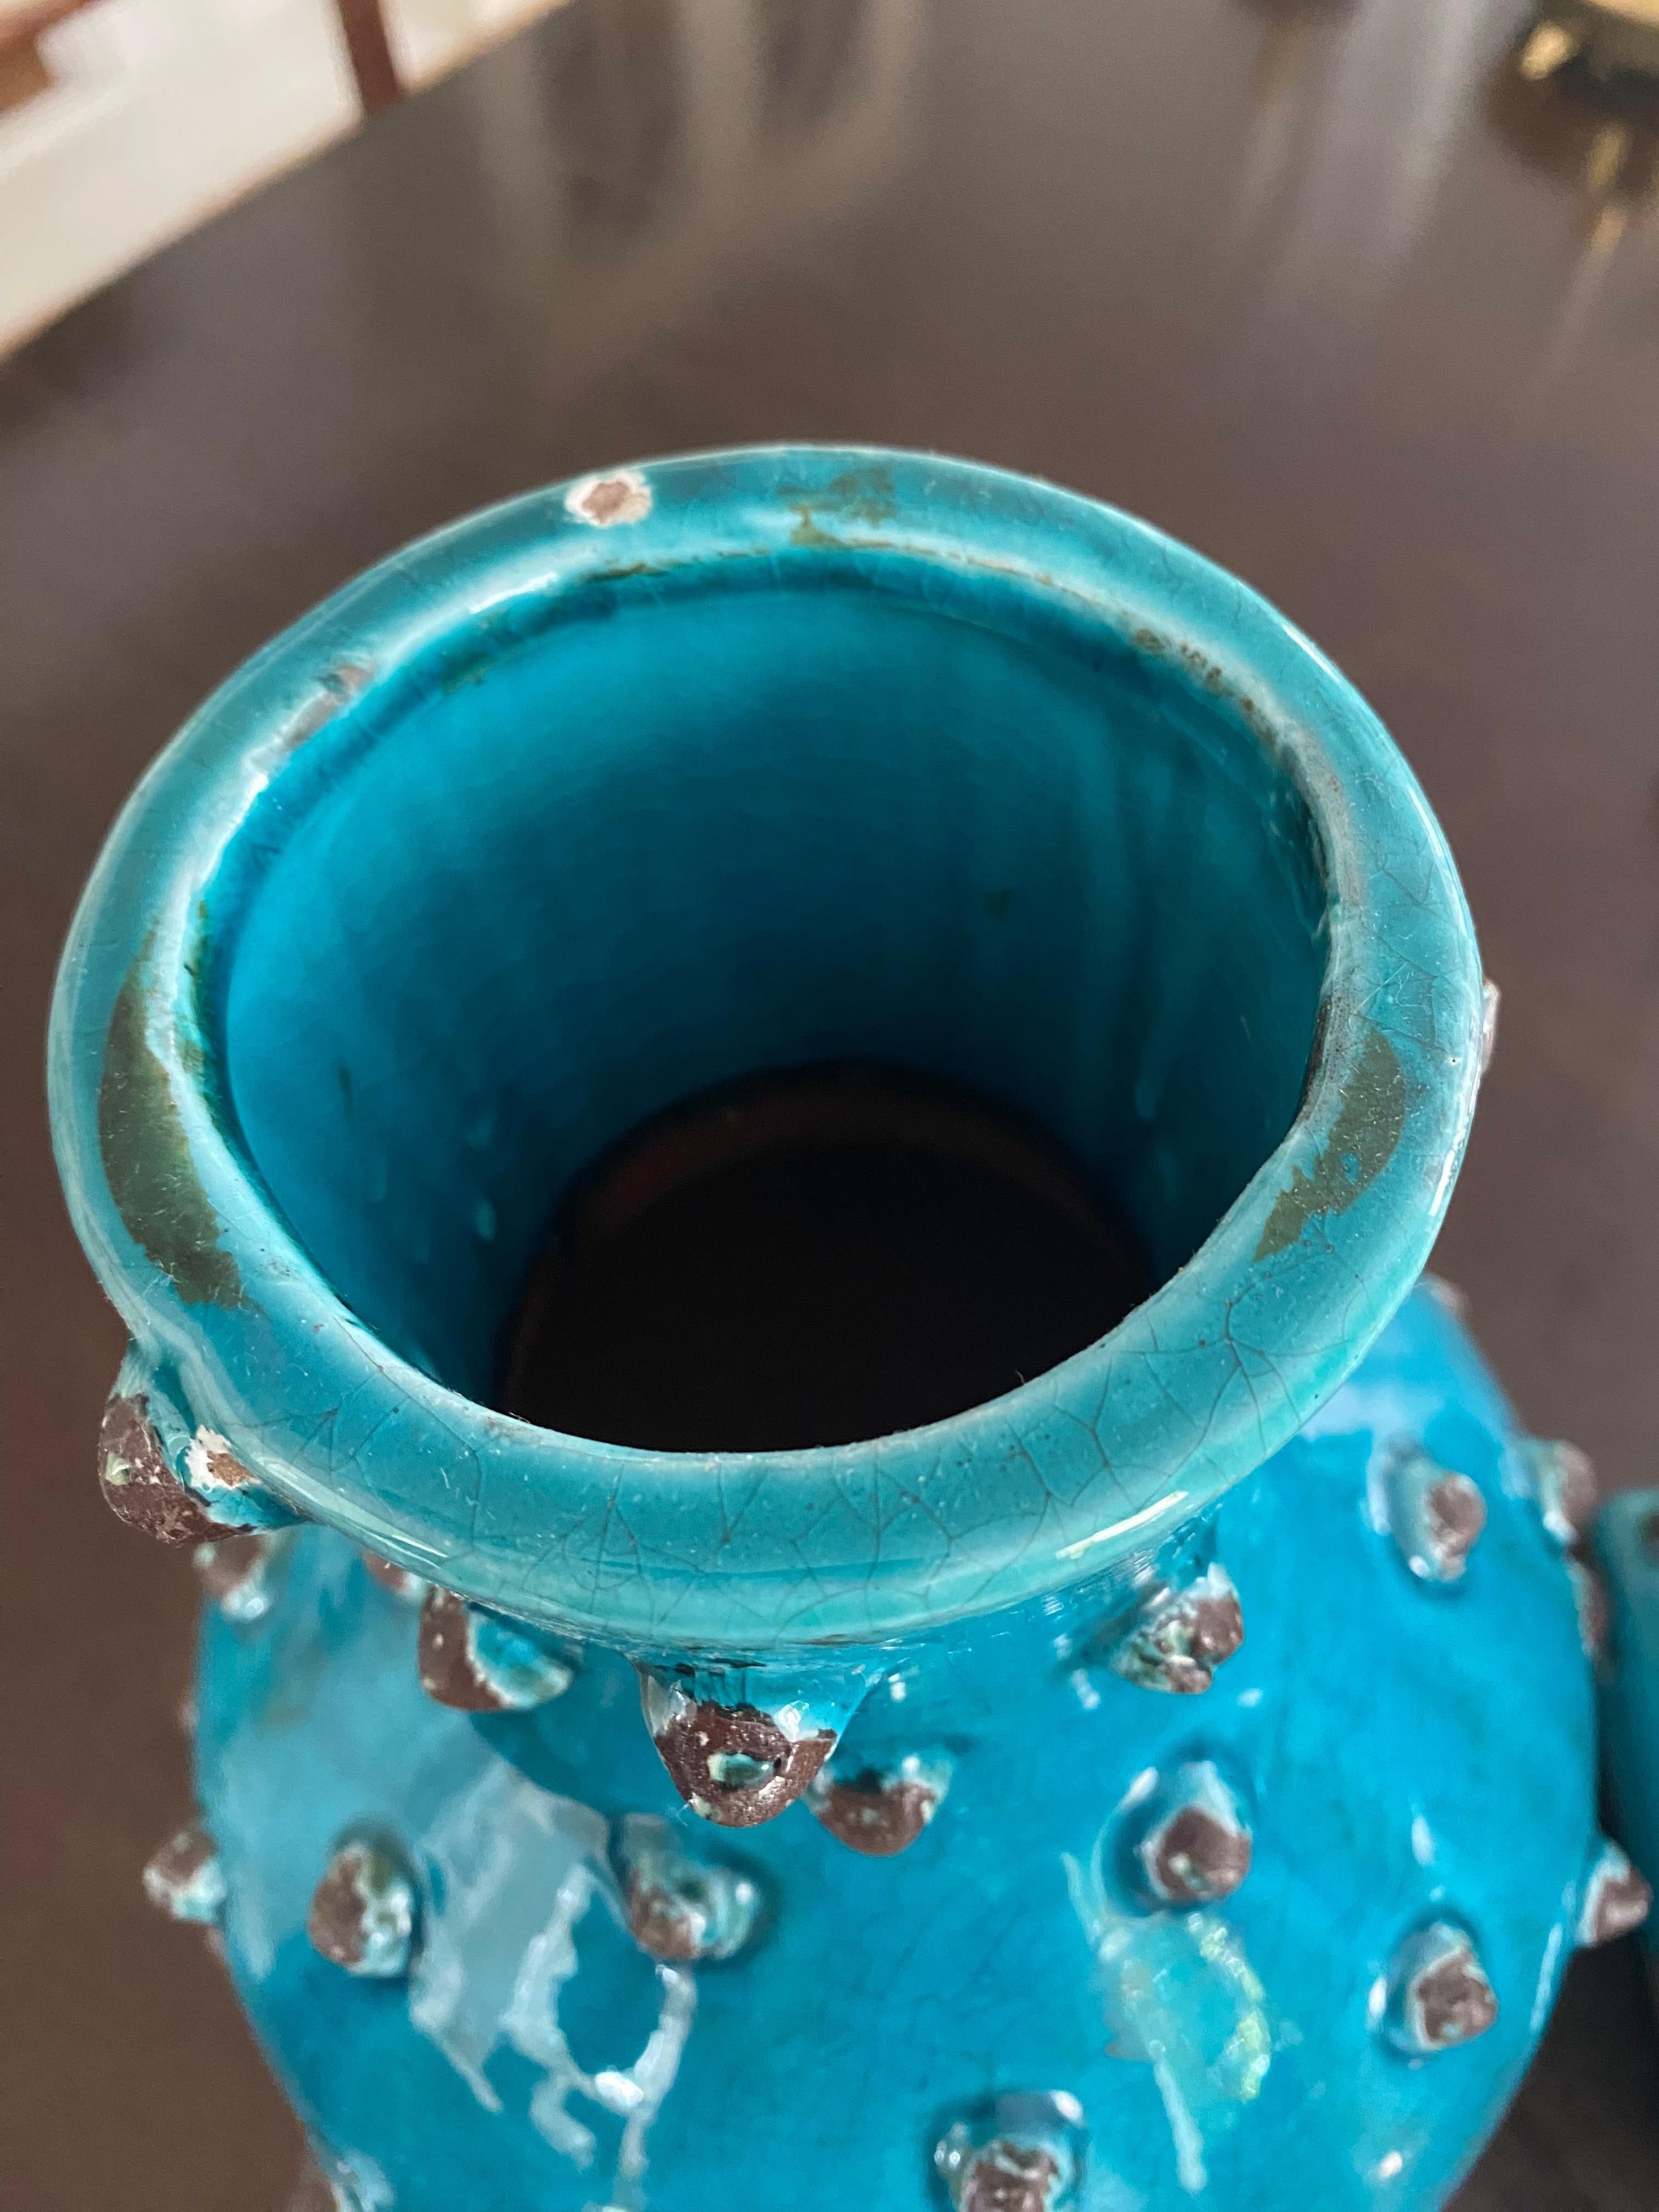 Set of turquoise glazed brutalist vases with studded texture and crazed surface.
Bold sculptural and functional form.

Signed Francois Bernard Paris

Statement piece...